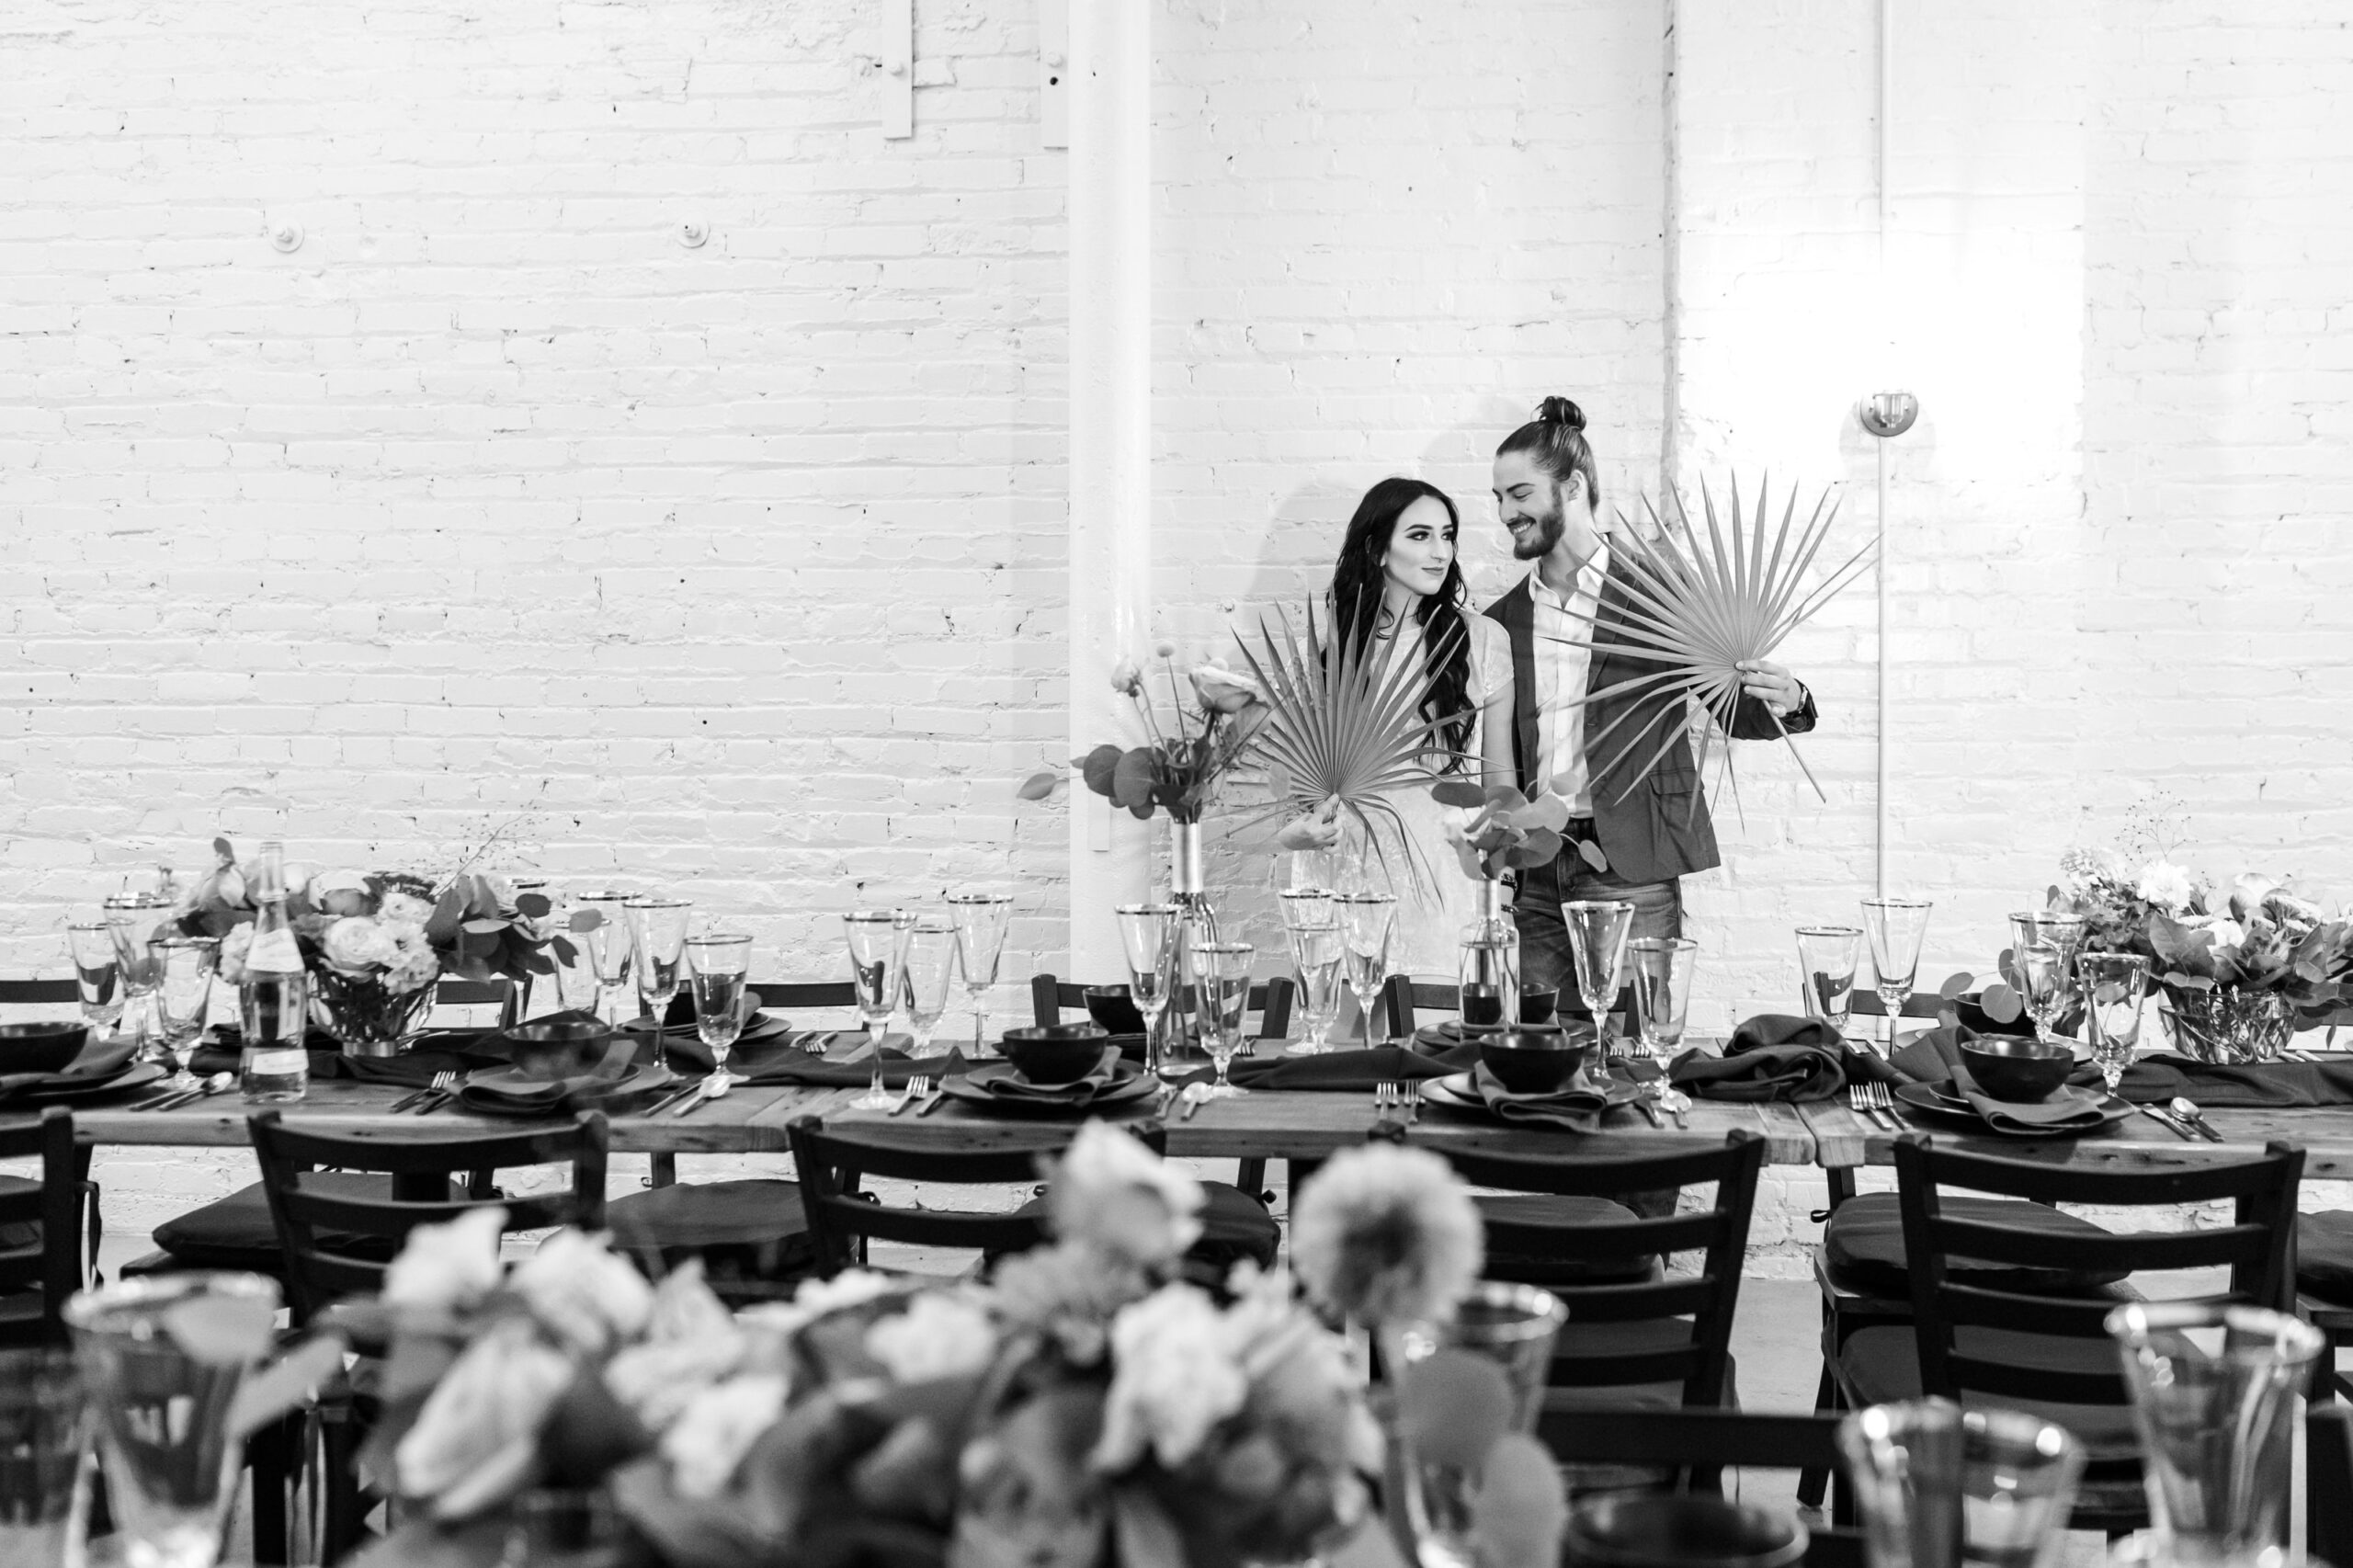 Newly wedded couple at Rochester Roasting and Brewing Company event space